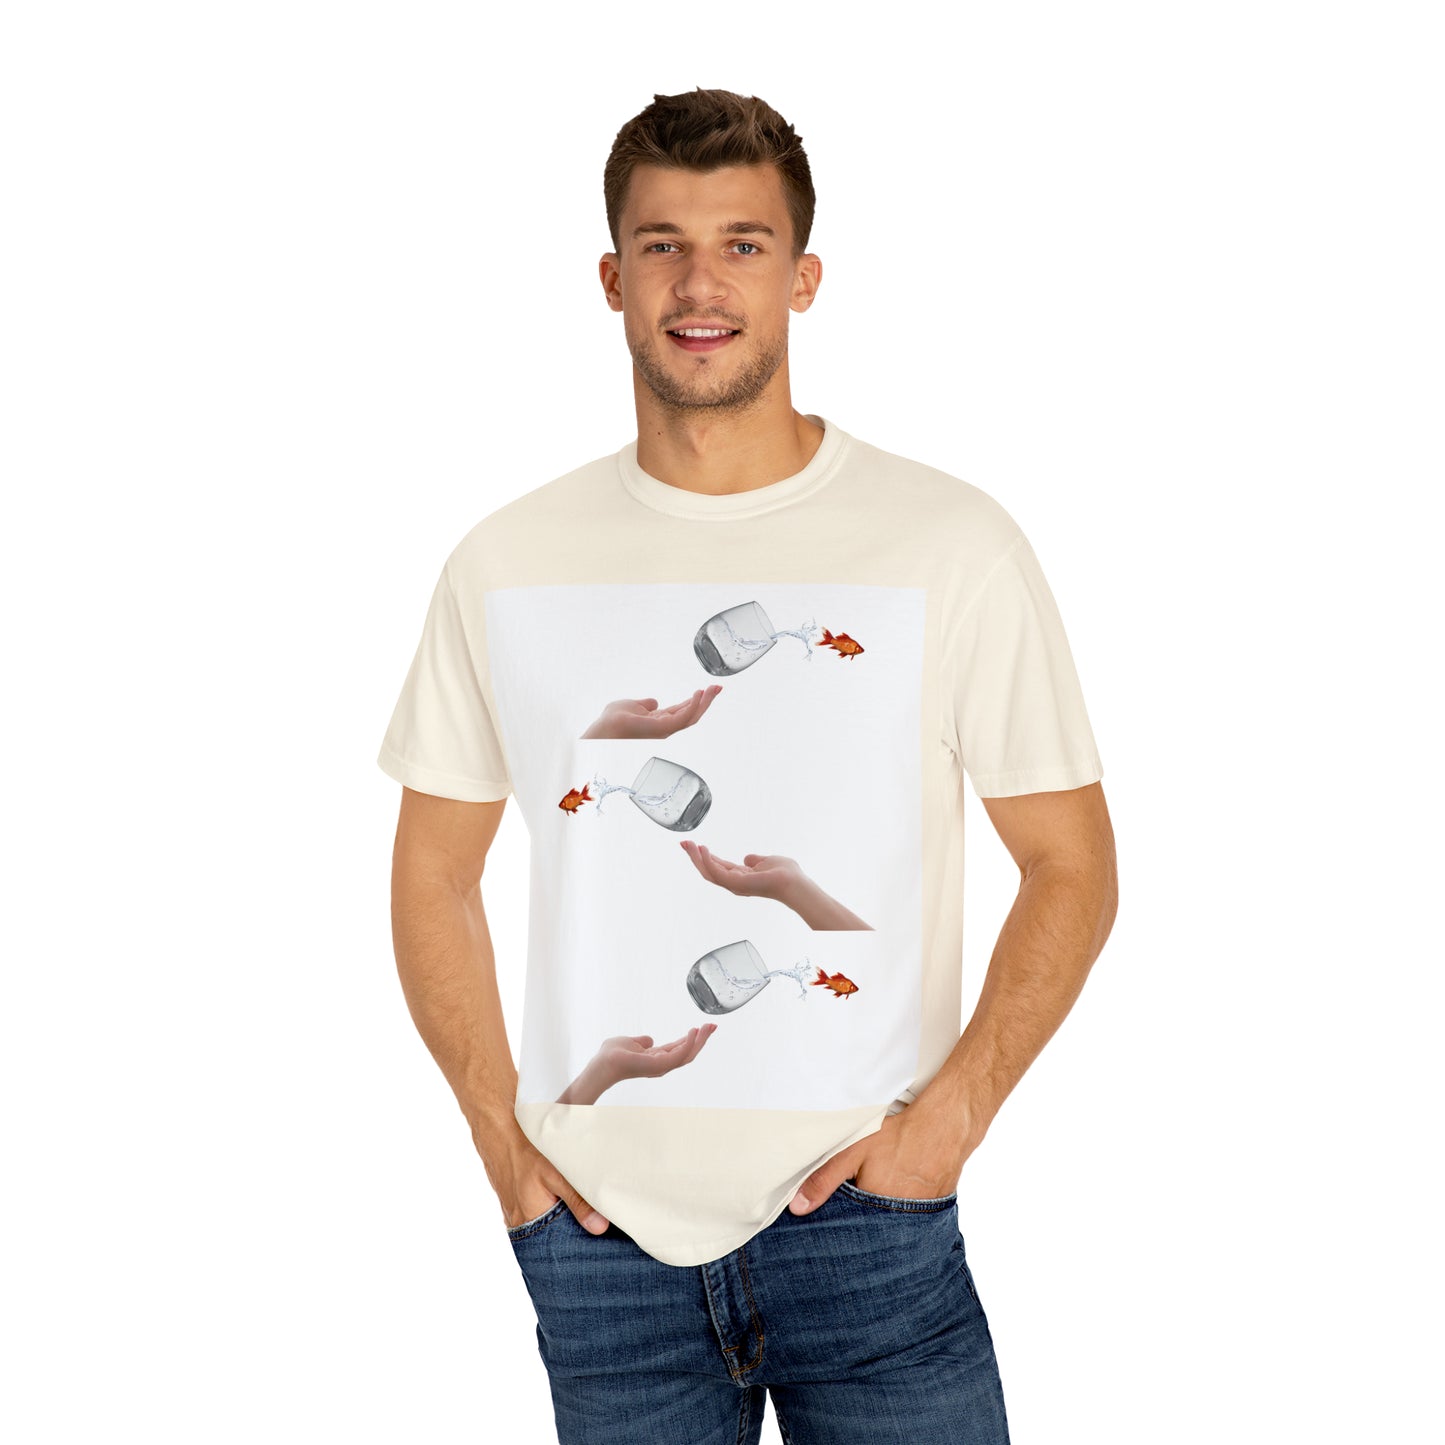 Don't feel like a fish out of water T-Shirt